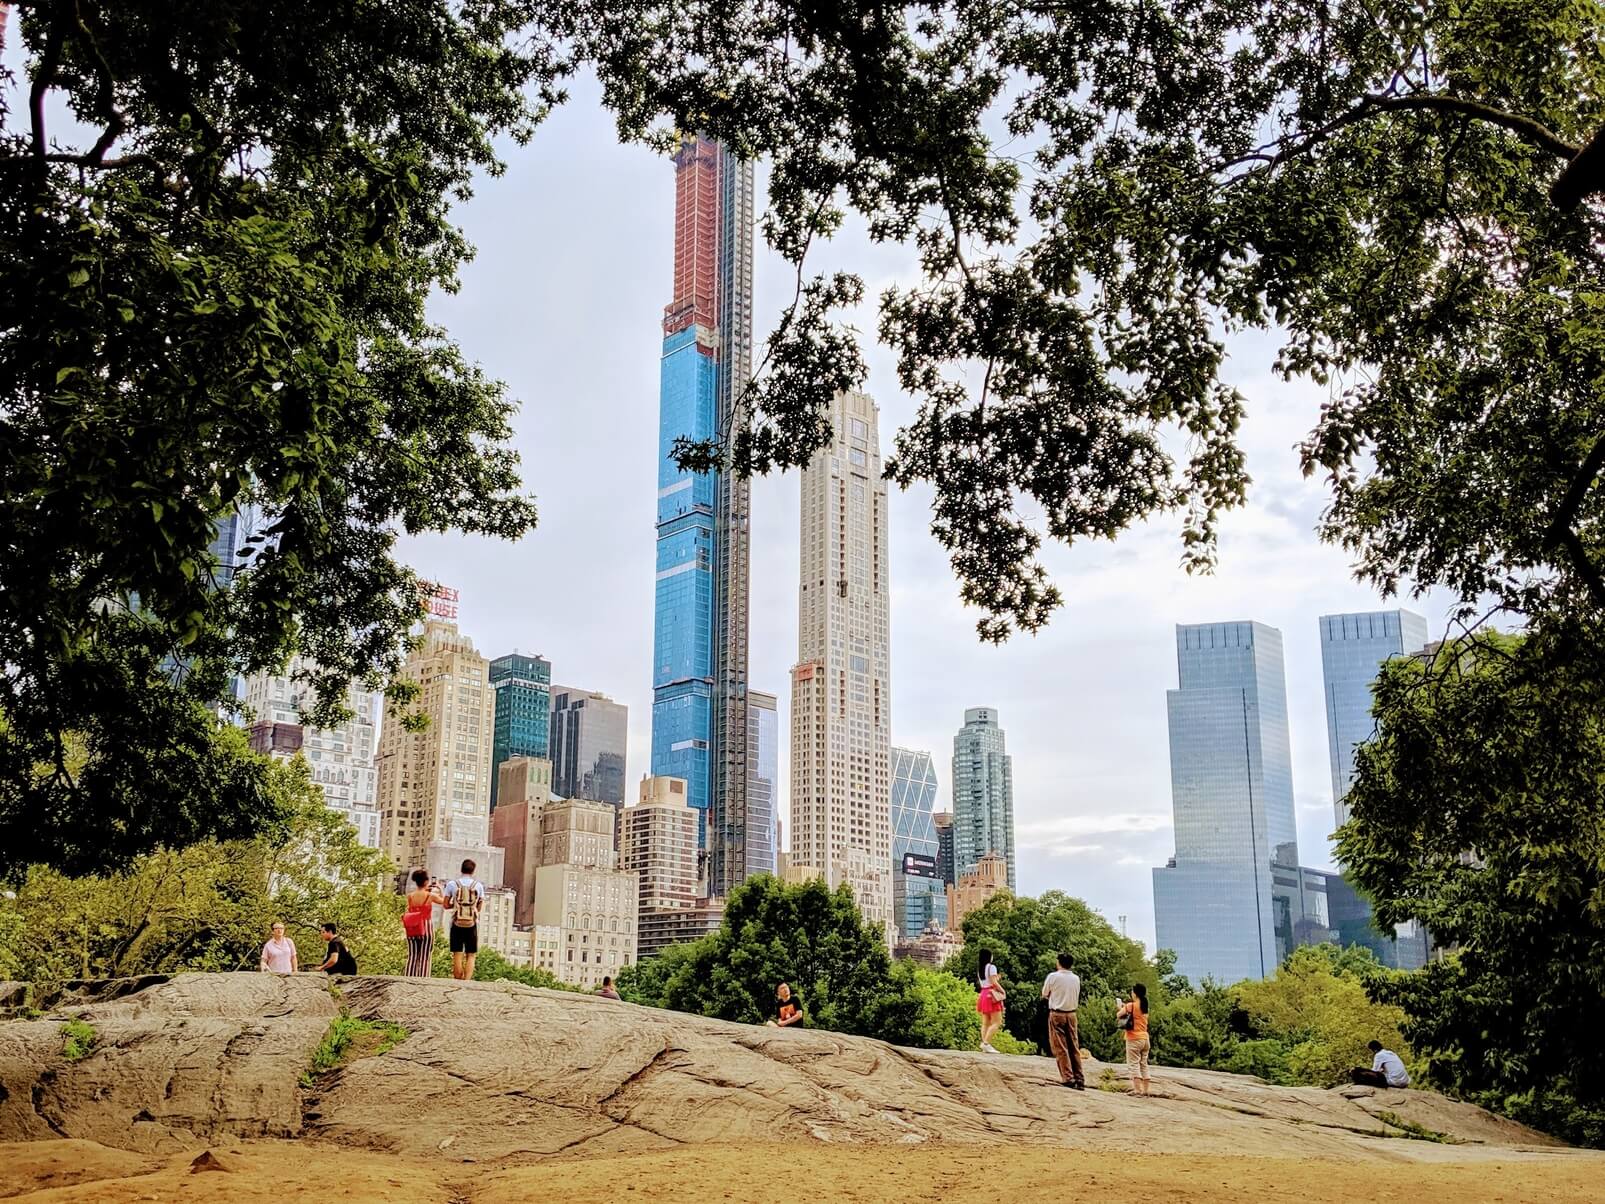 NYC skyline view from central park | FlyCheapAlways